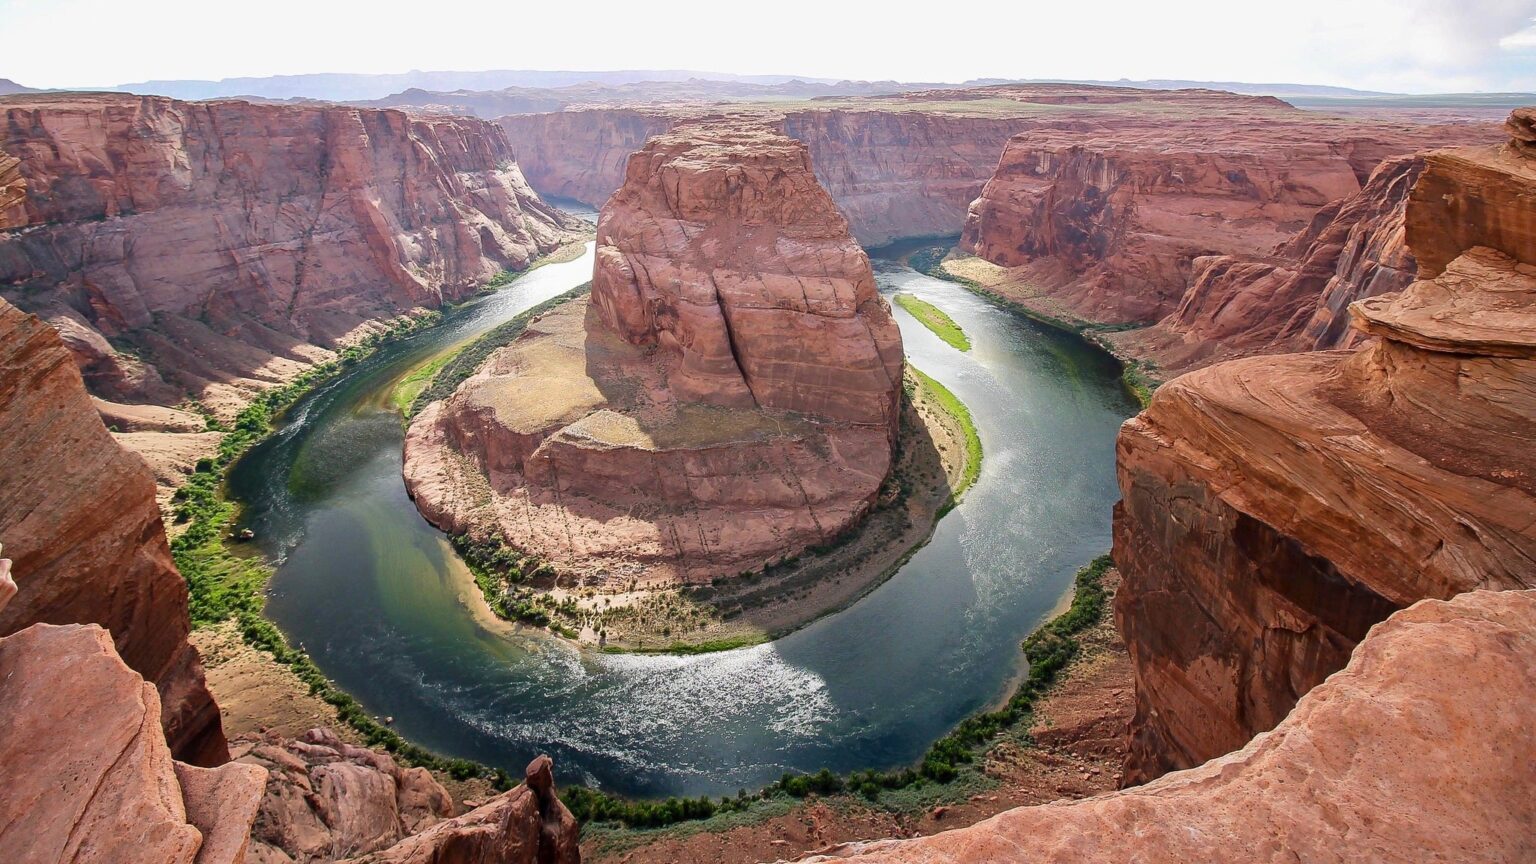 Colorado River Has Lost 1 5 Billion Tons Of Water To The Climate Crisis Severe Water Shortages